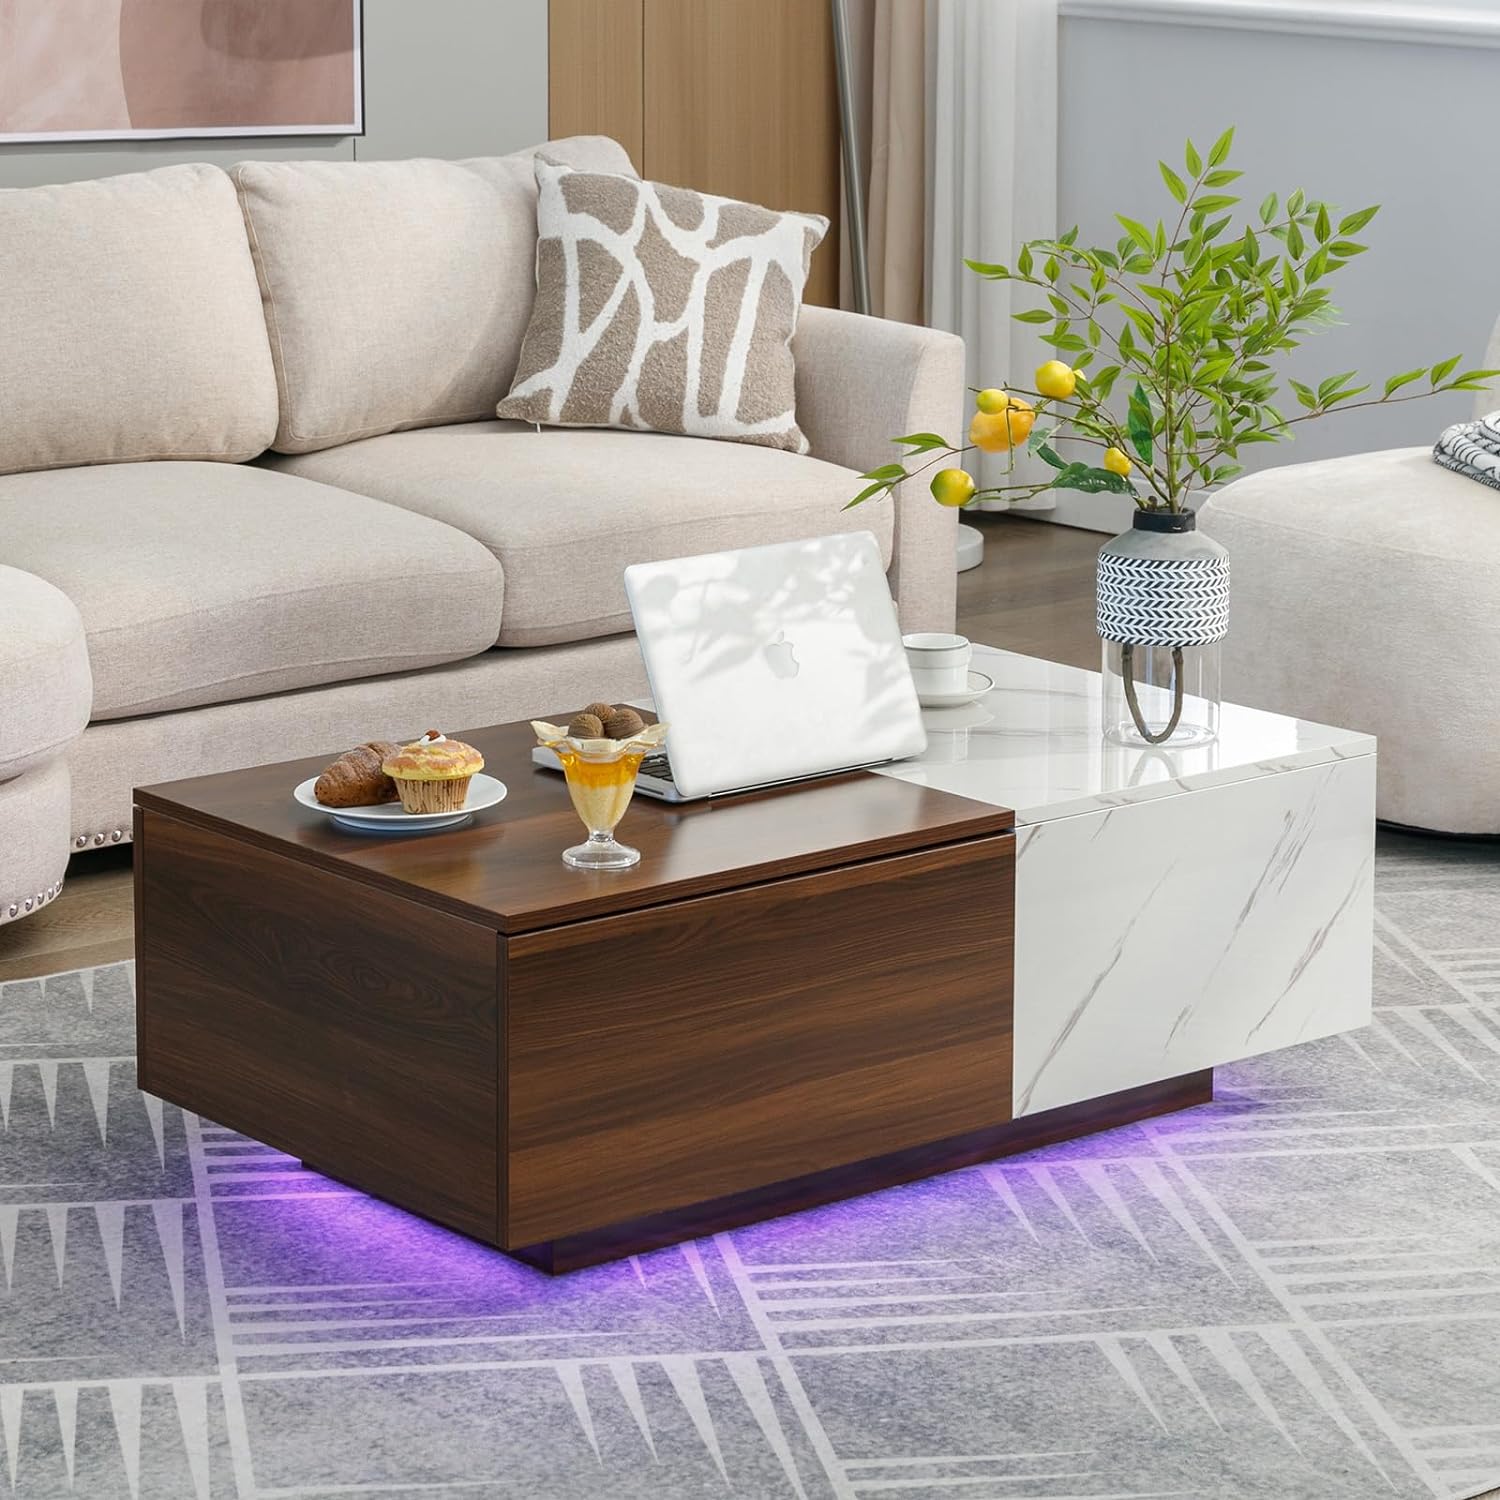 COSVALVE 43 LED Coffee Table for Living Room, Marble Coffee Tables with 2 Storage Drawers, Modern Center Table with 24 Colors LED Light, Walnut and White